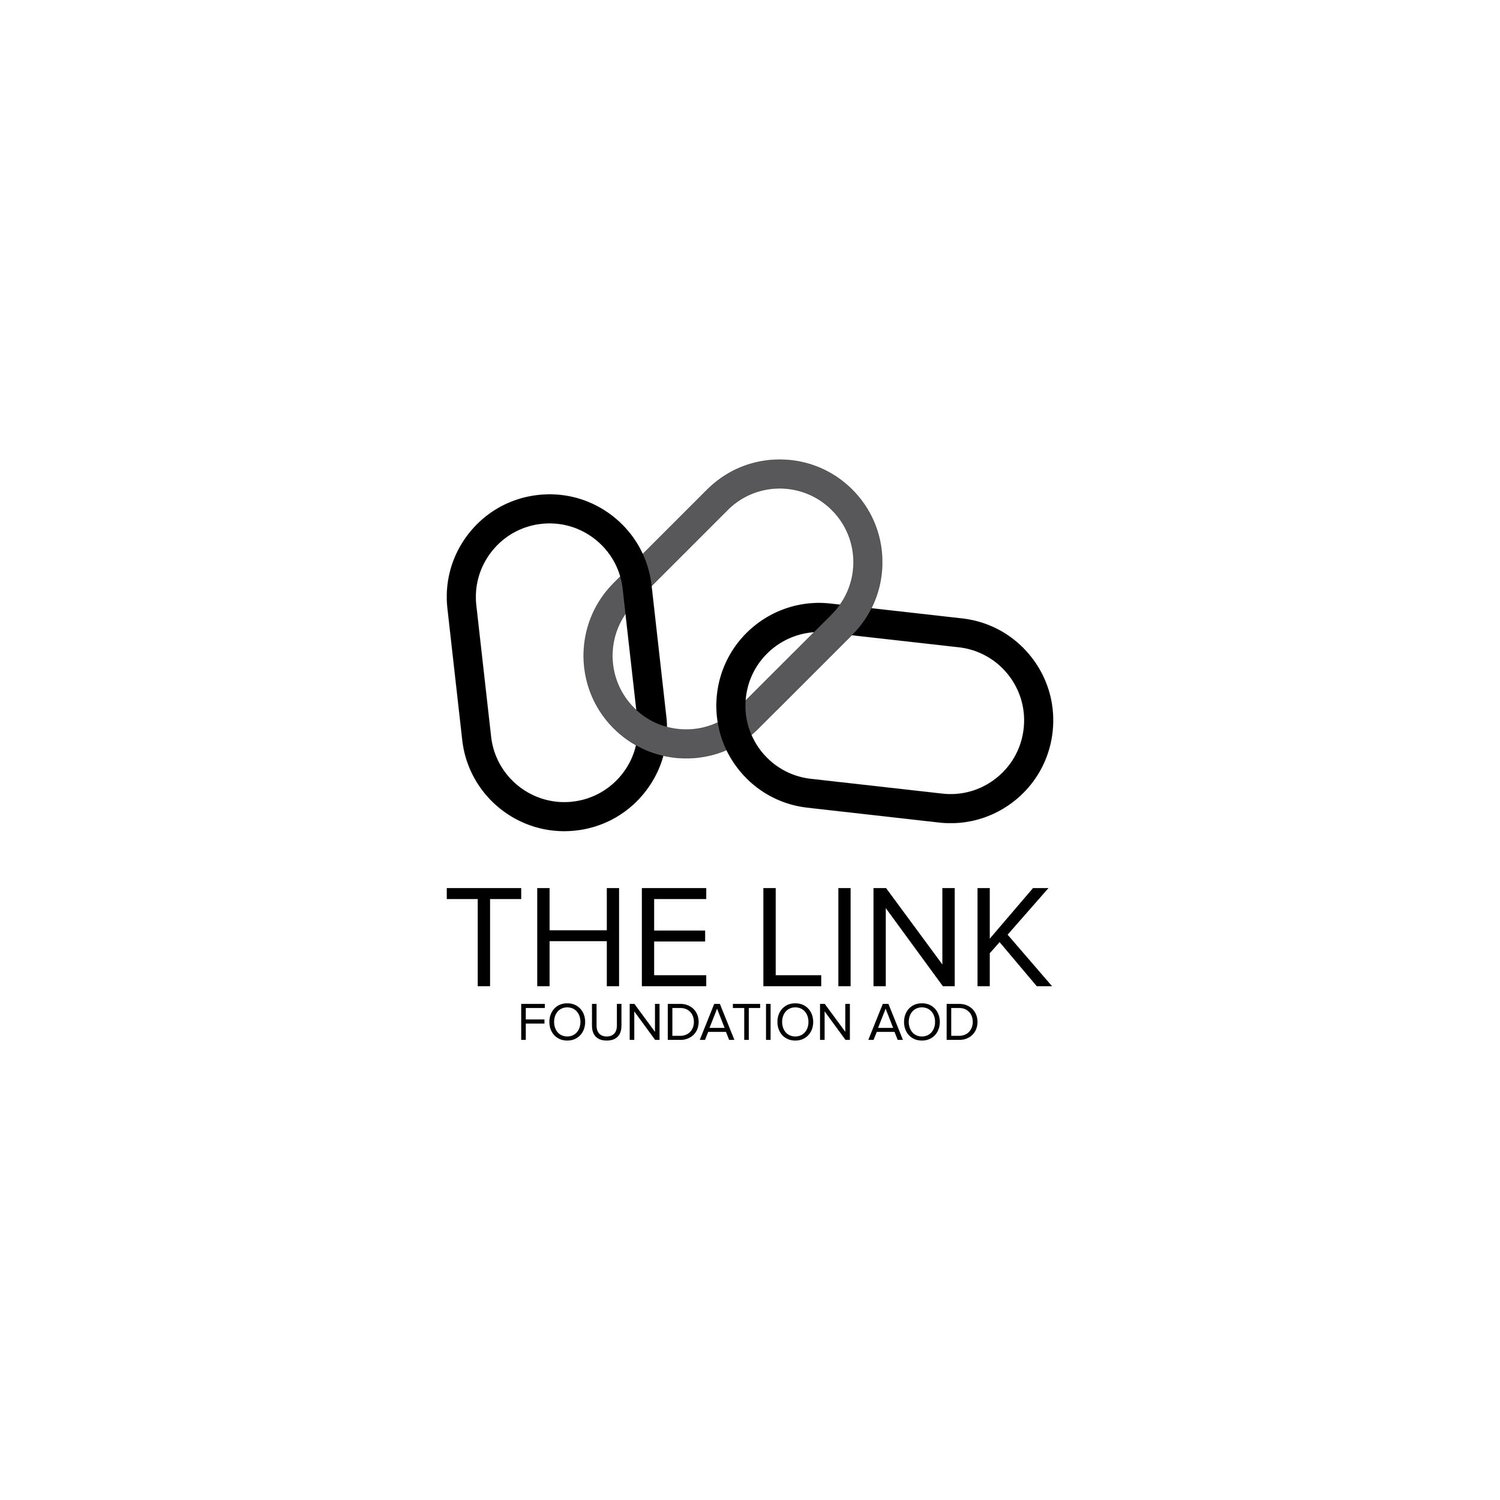 THE LINK FOUNDATION